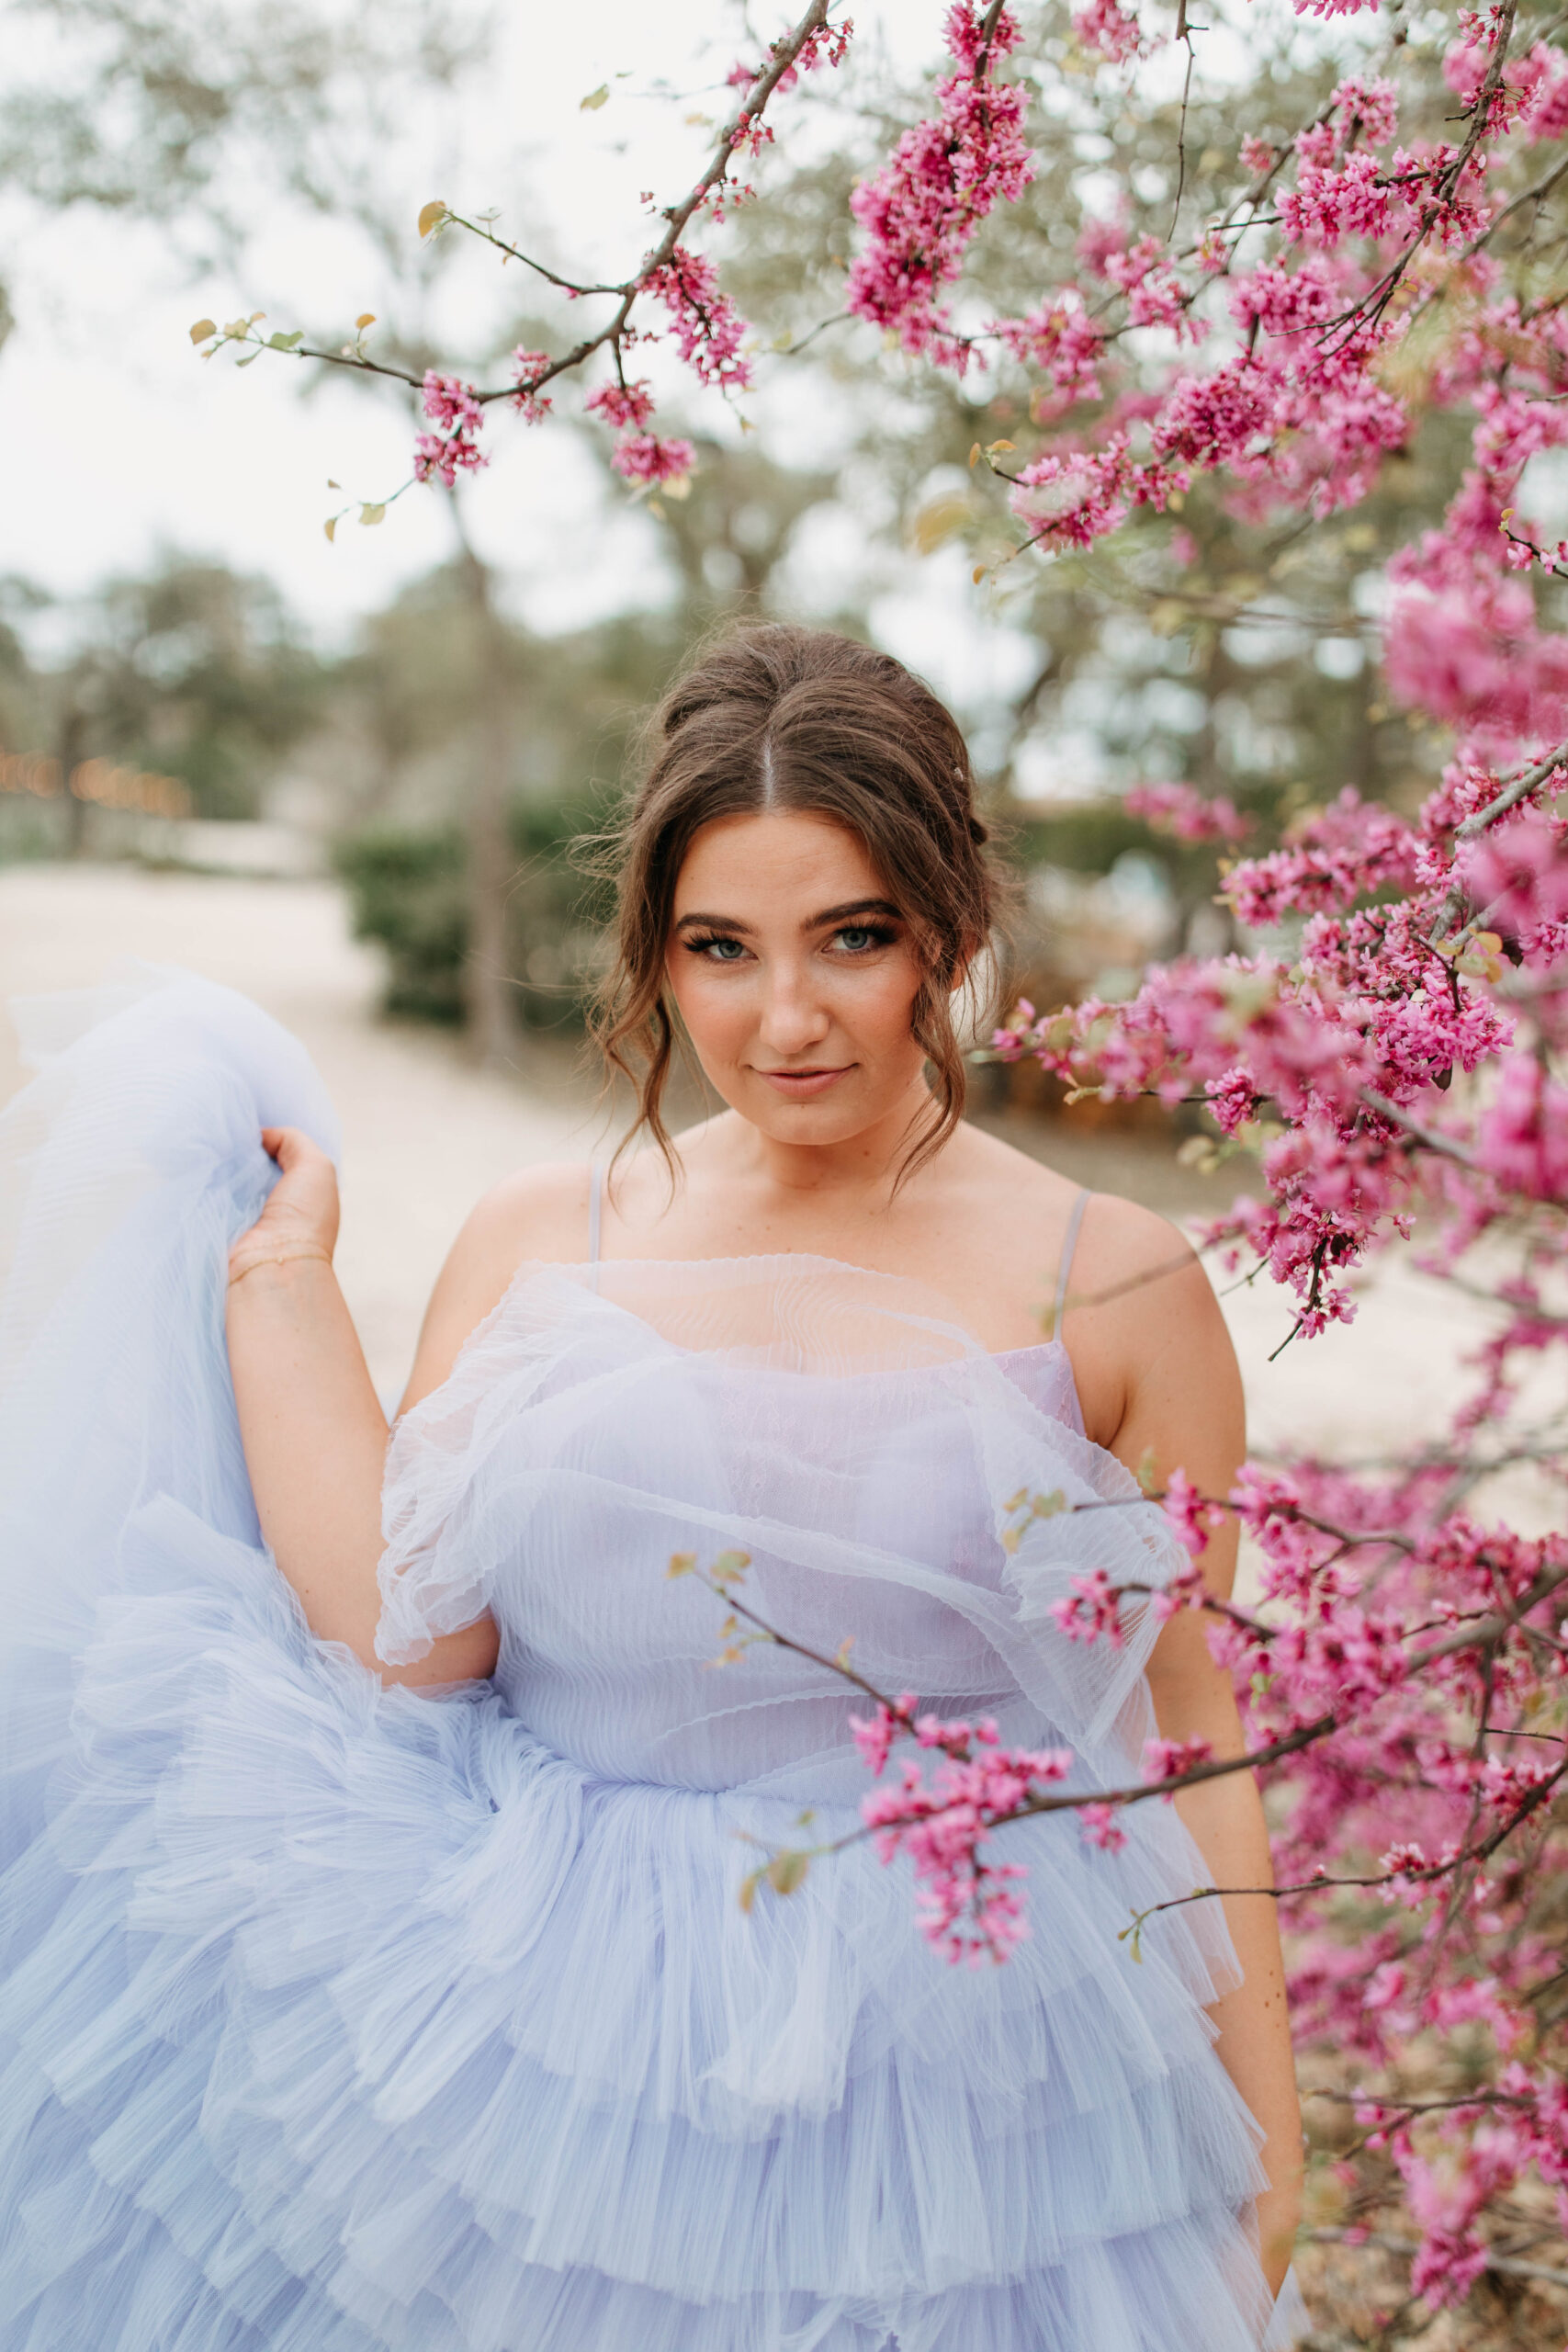 Bridal Portraits in the Spring in front of Blossoms. A spring wedding Inspiration photo.